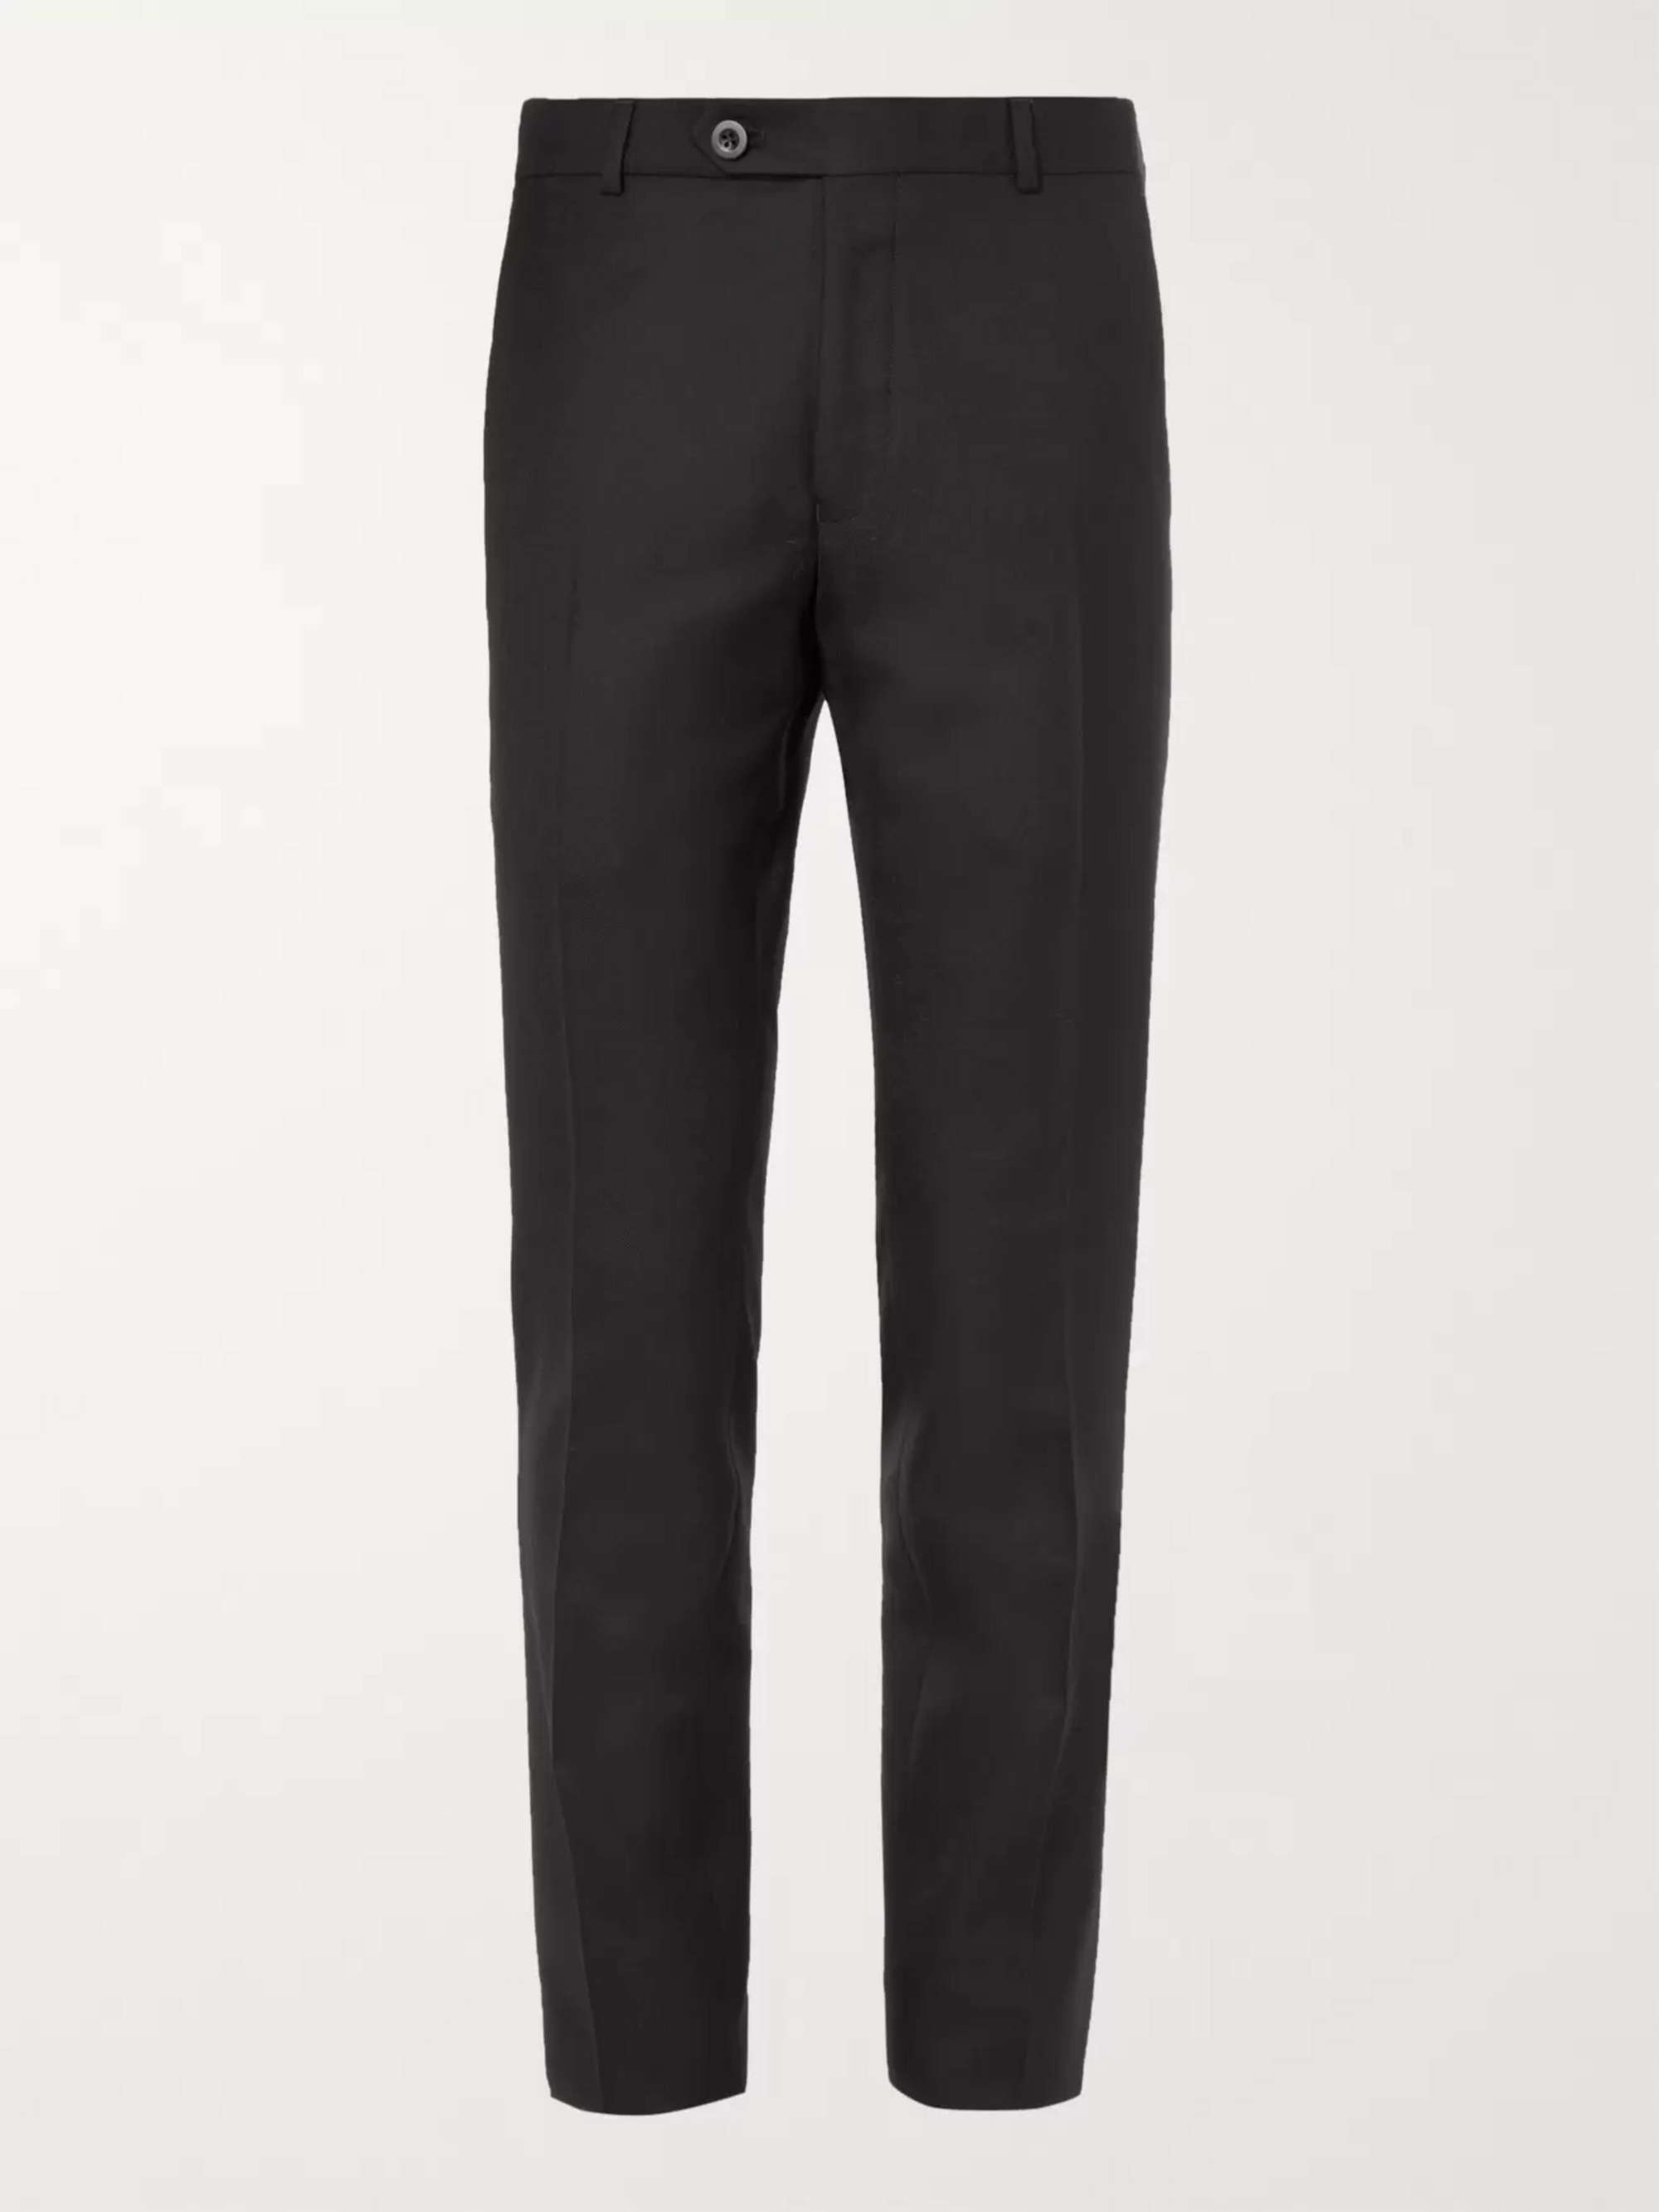 Buy Brown Trousers & Pants for Men by Zegna Online | Ajio.com